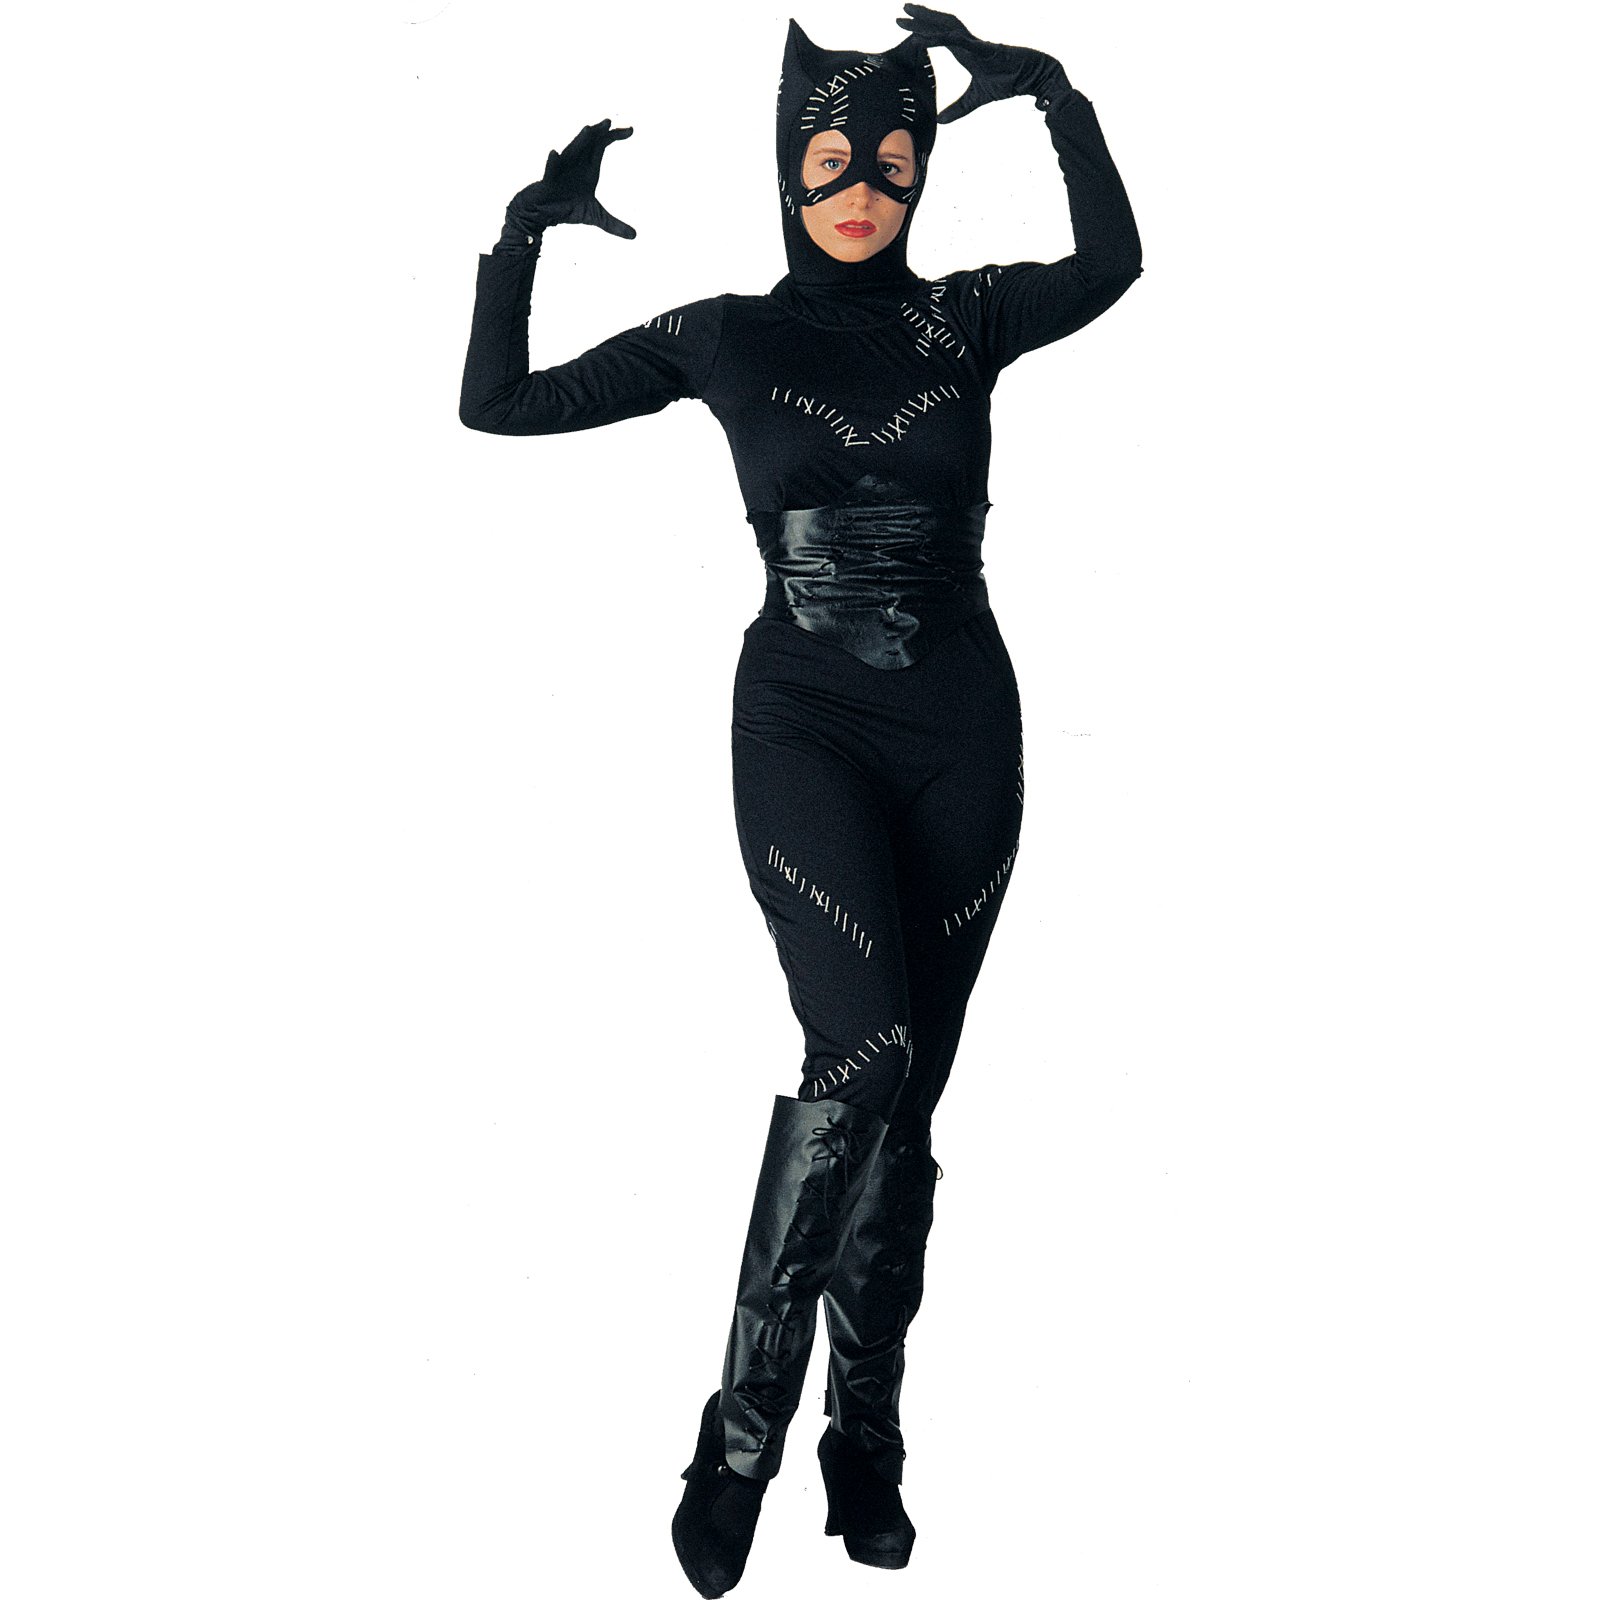 catwoman costume | Image Browser Net